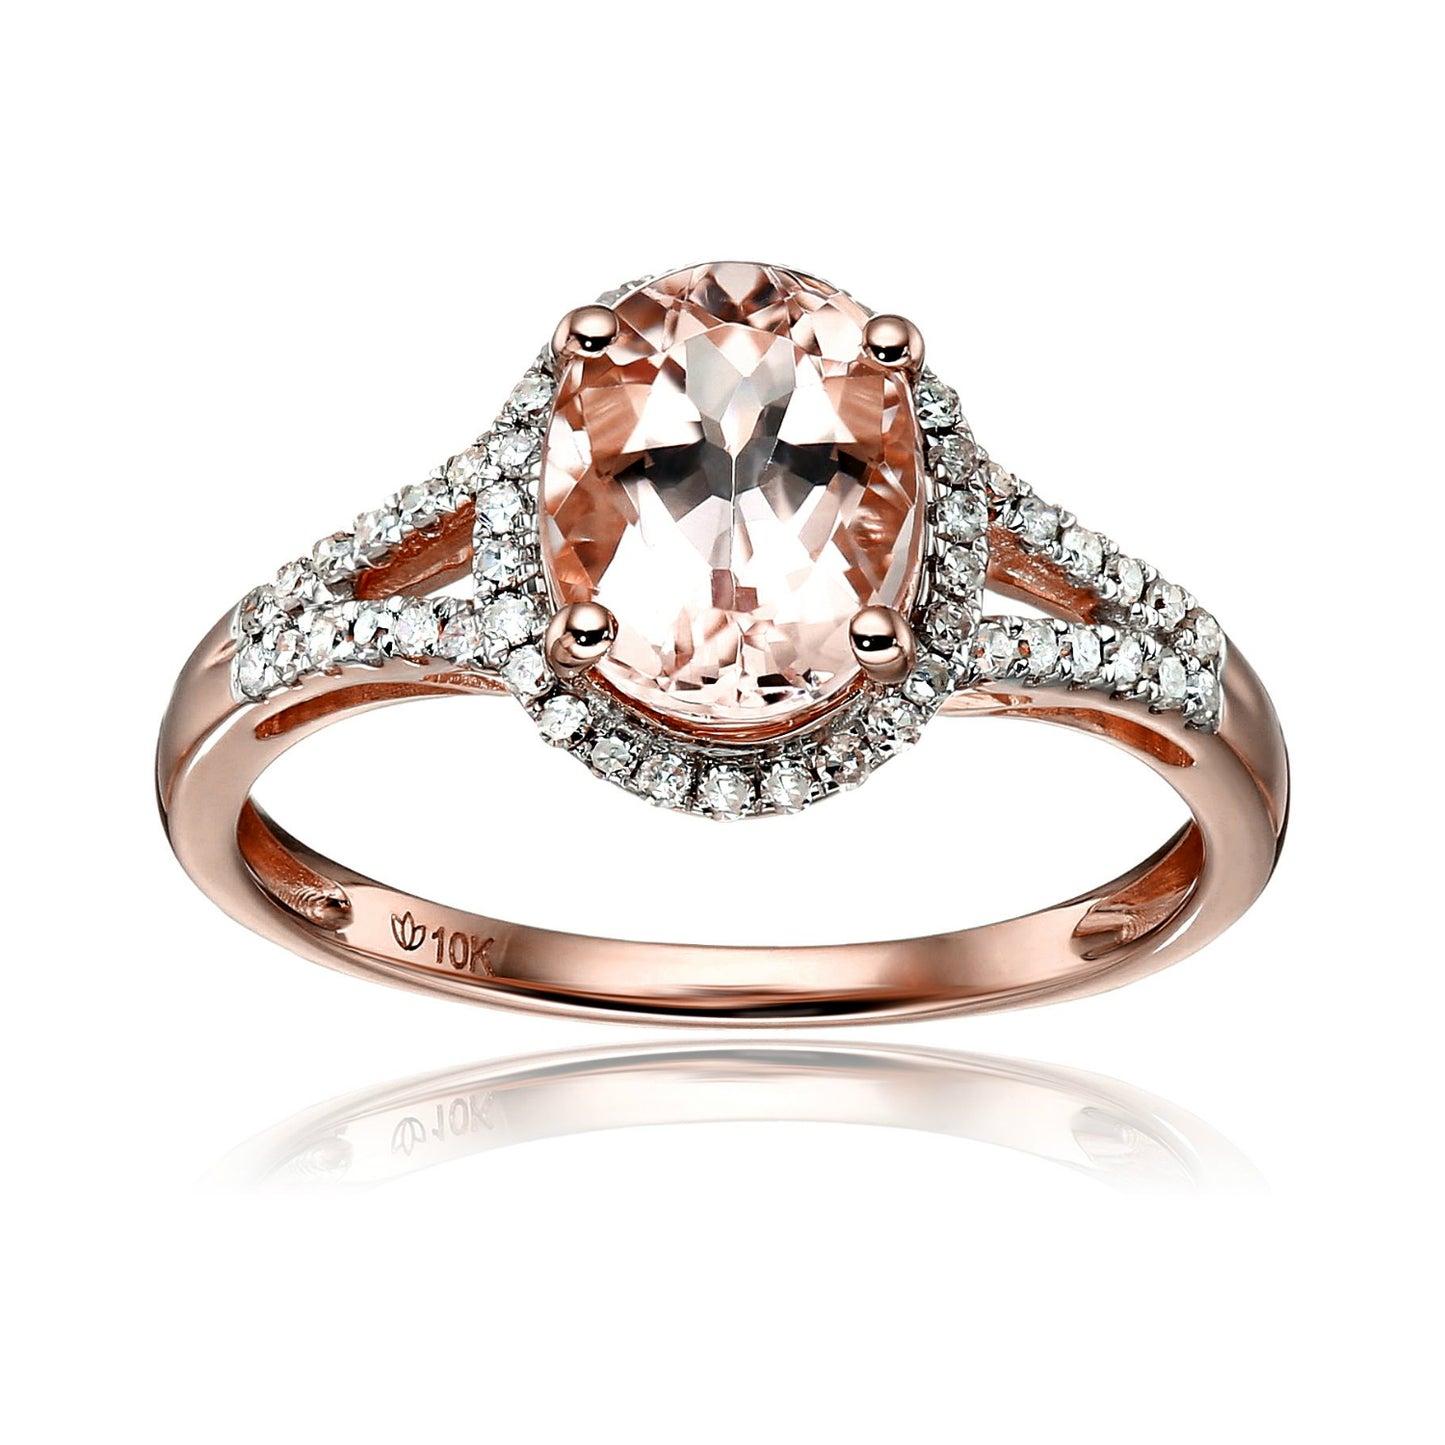 Pinctore 10k Rose Gold Morganite And Diamond Oval Halo Ring (1/5cttw H-I Color, I1-I2 Clarity) - pinctore